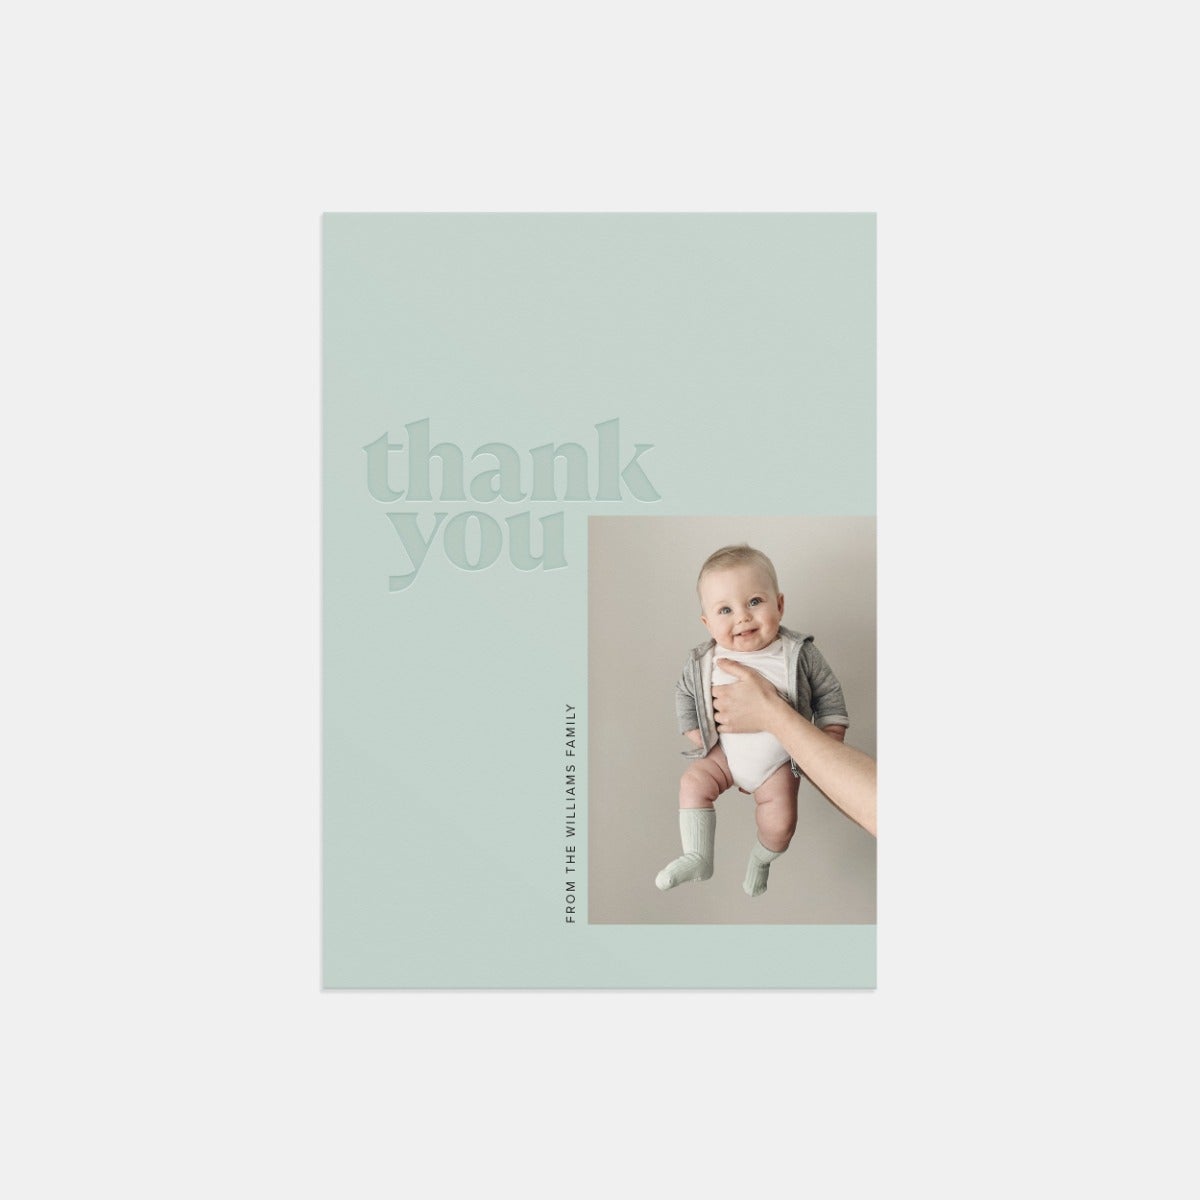 Groovy Grateful Thank You Card by Artifact Uprising | Cards